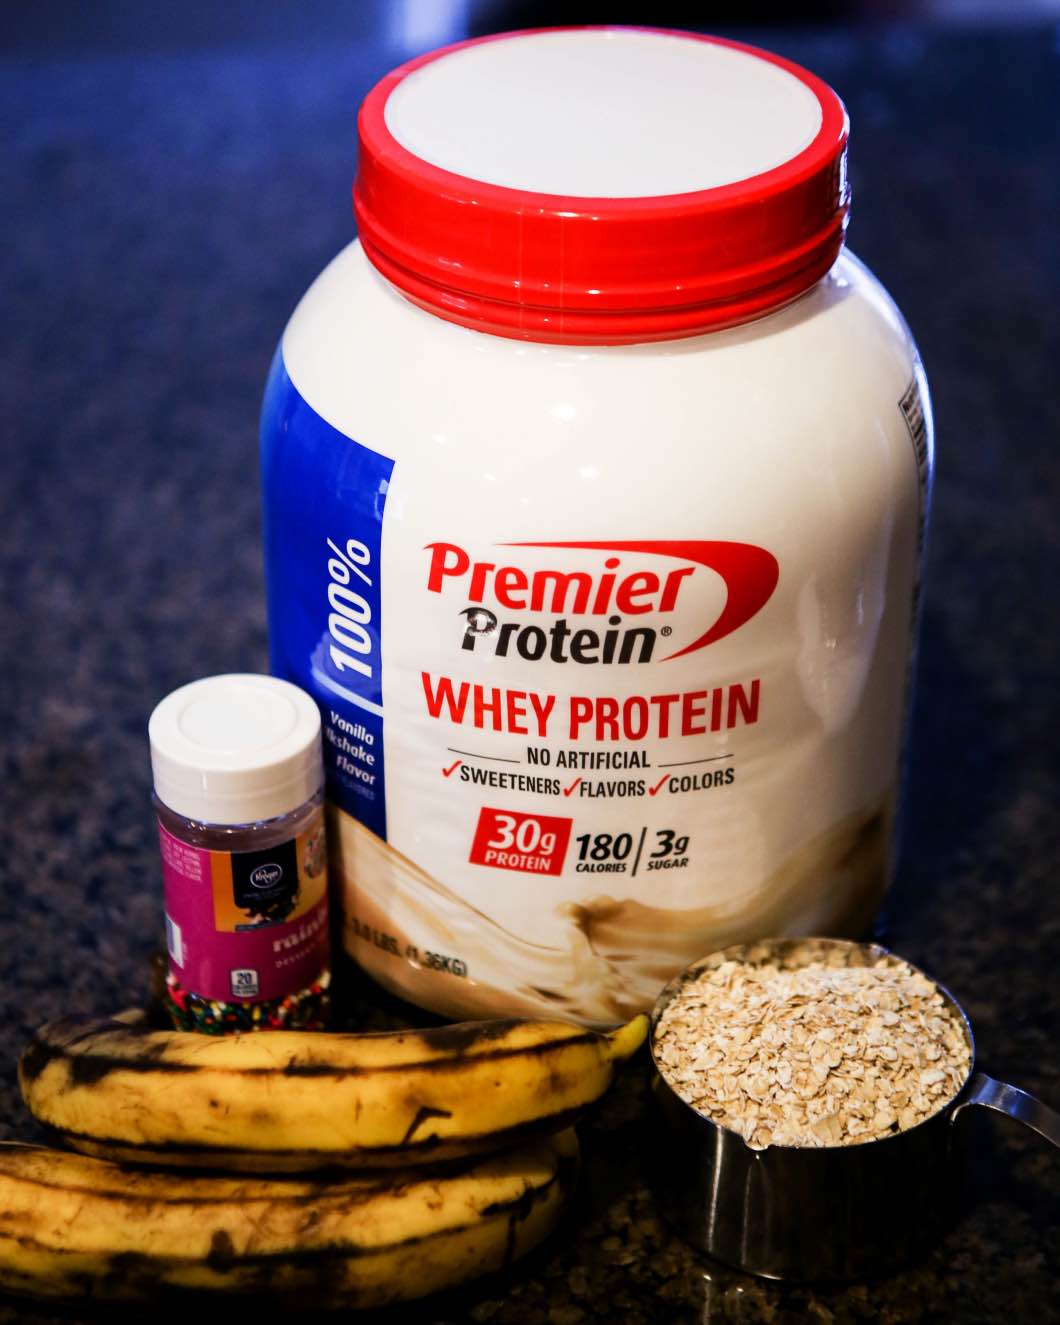 Birthday Cake Protein Cookies with Premier Protein